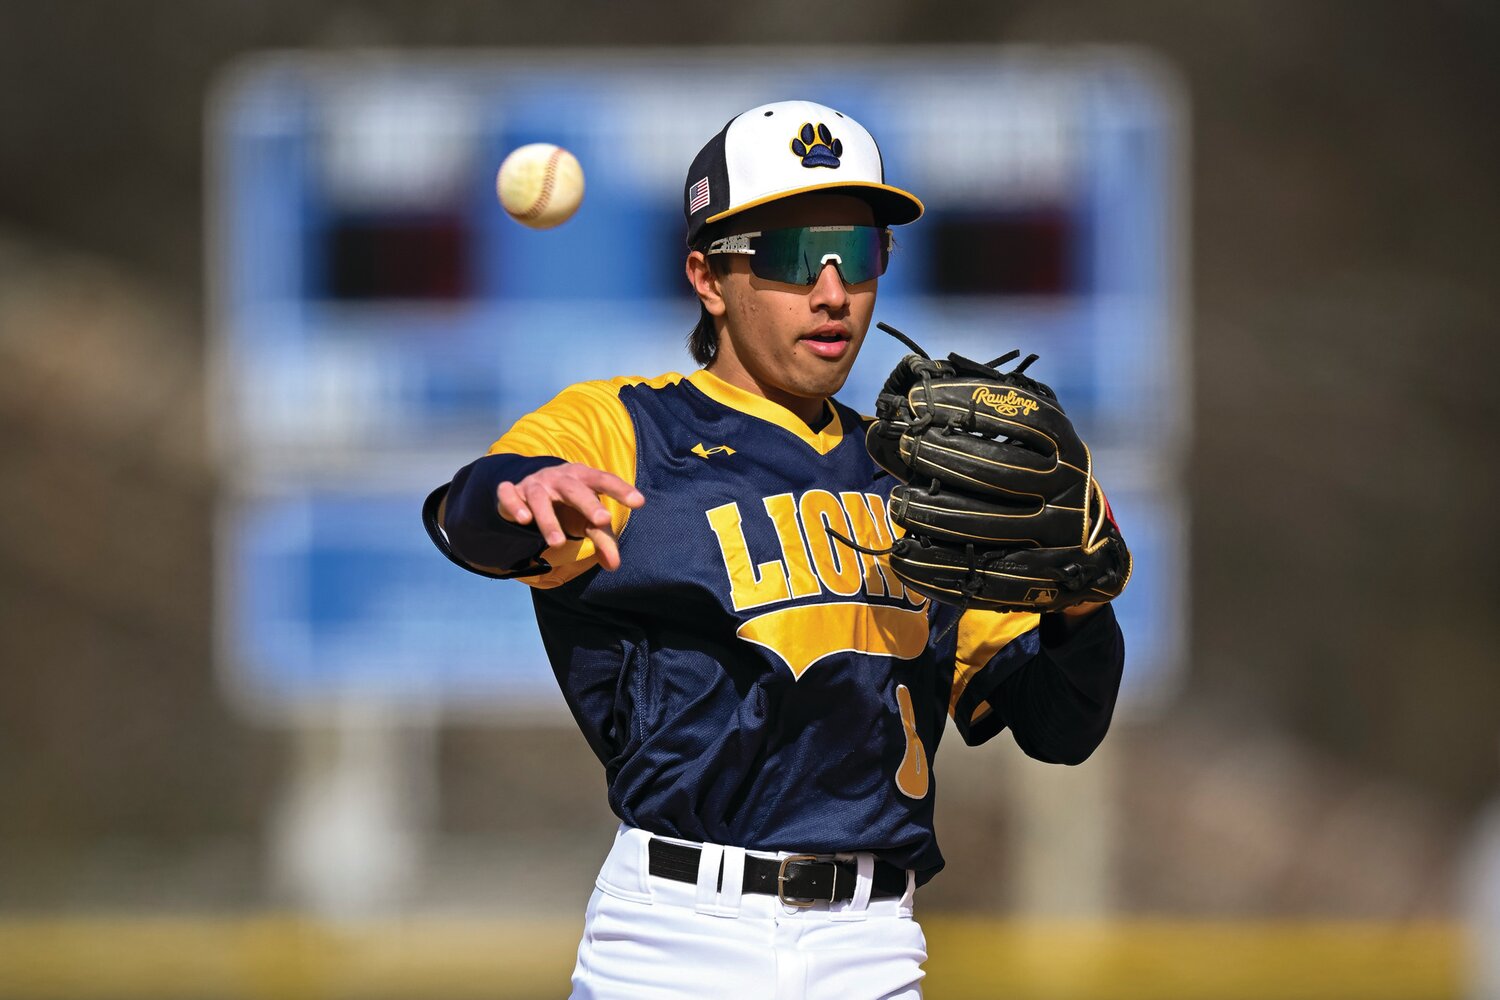 New Hope-Solebury’s Kieran Patel fields a ground ball in the first inning.